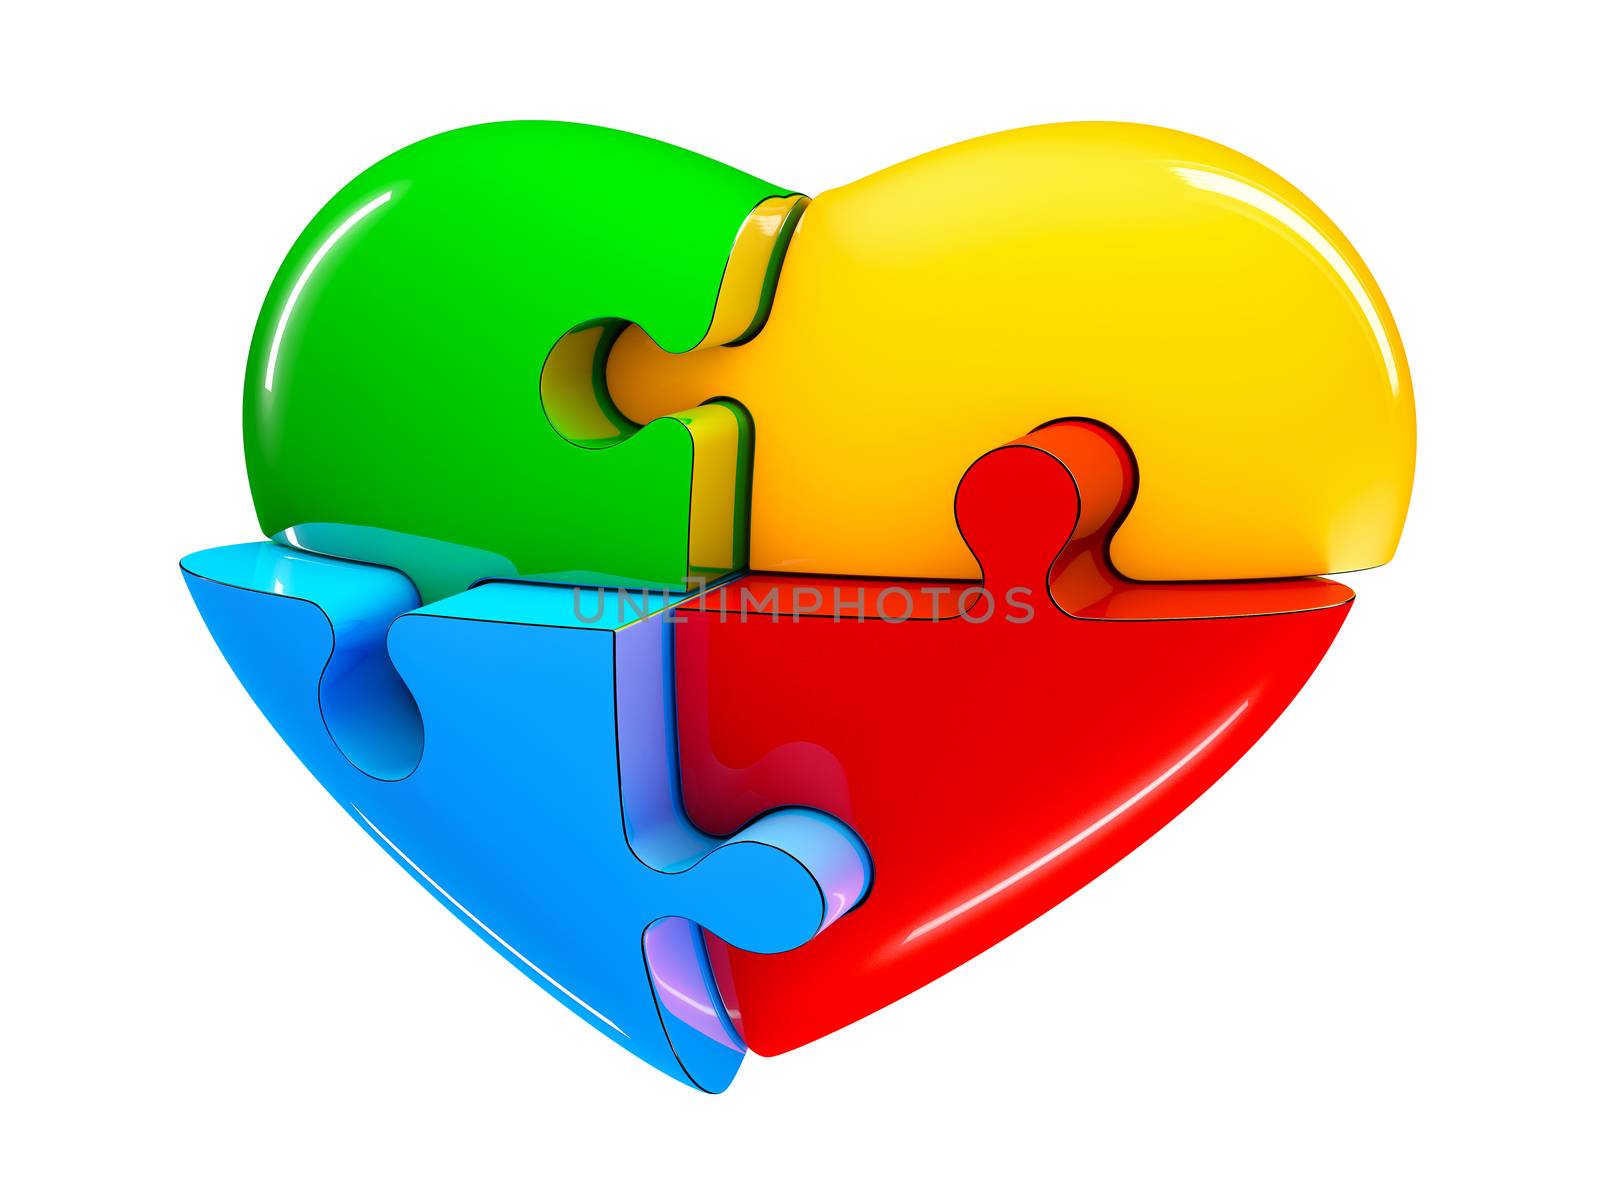 4 part jigsaw puzzle heart diagram 3d illustration isolated on white background.